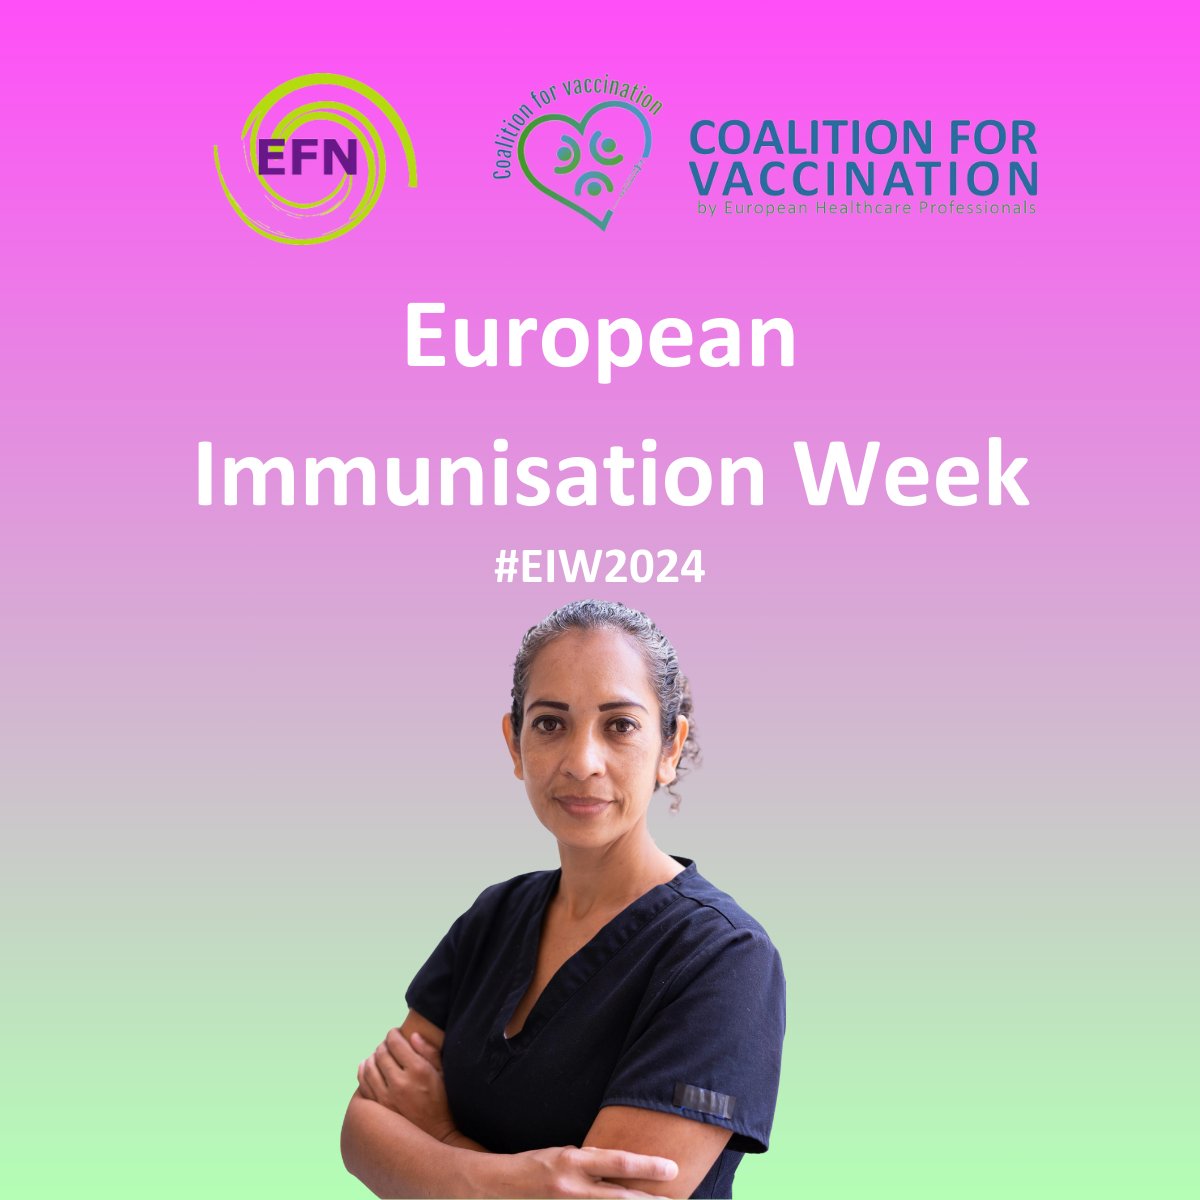 Nurses are the most trusted healthcare professionals and play a key role in vaccines education for citizens and patients.
#EFN #EIW2024 #GetVaccinated #Nursesforvaccination #Nurses #Prevention #Longlifeforall #EPI  #vaccination #coalitionforvaccination #UnitedInProtection